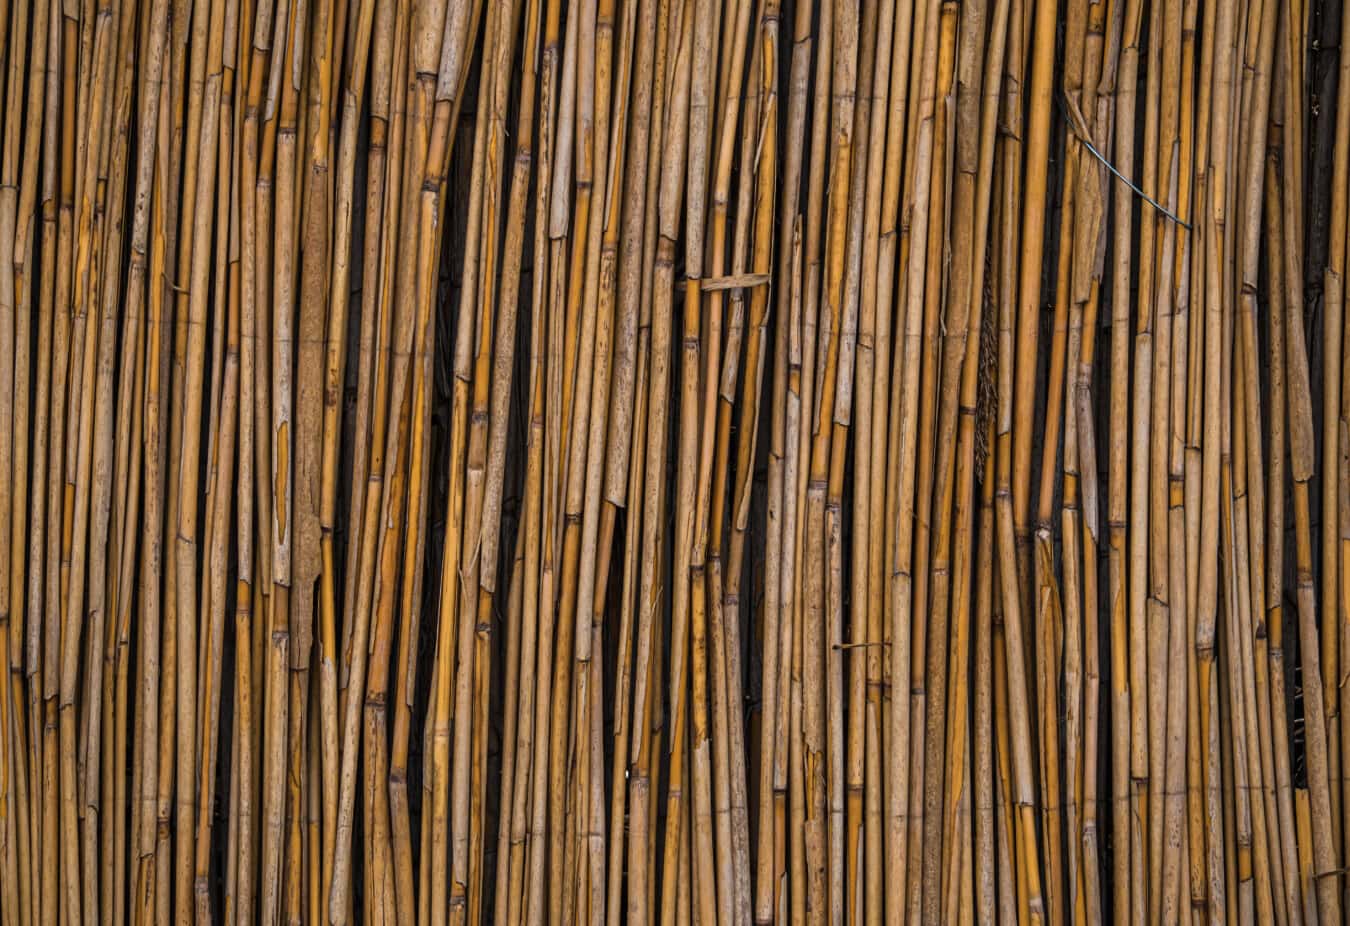 reed grass, texture, reeds, stripe, vertical, material, rough, pattern, dirty, old